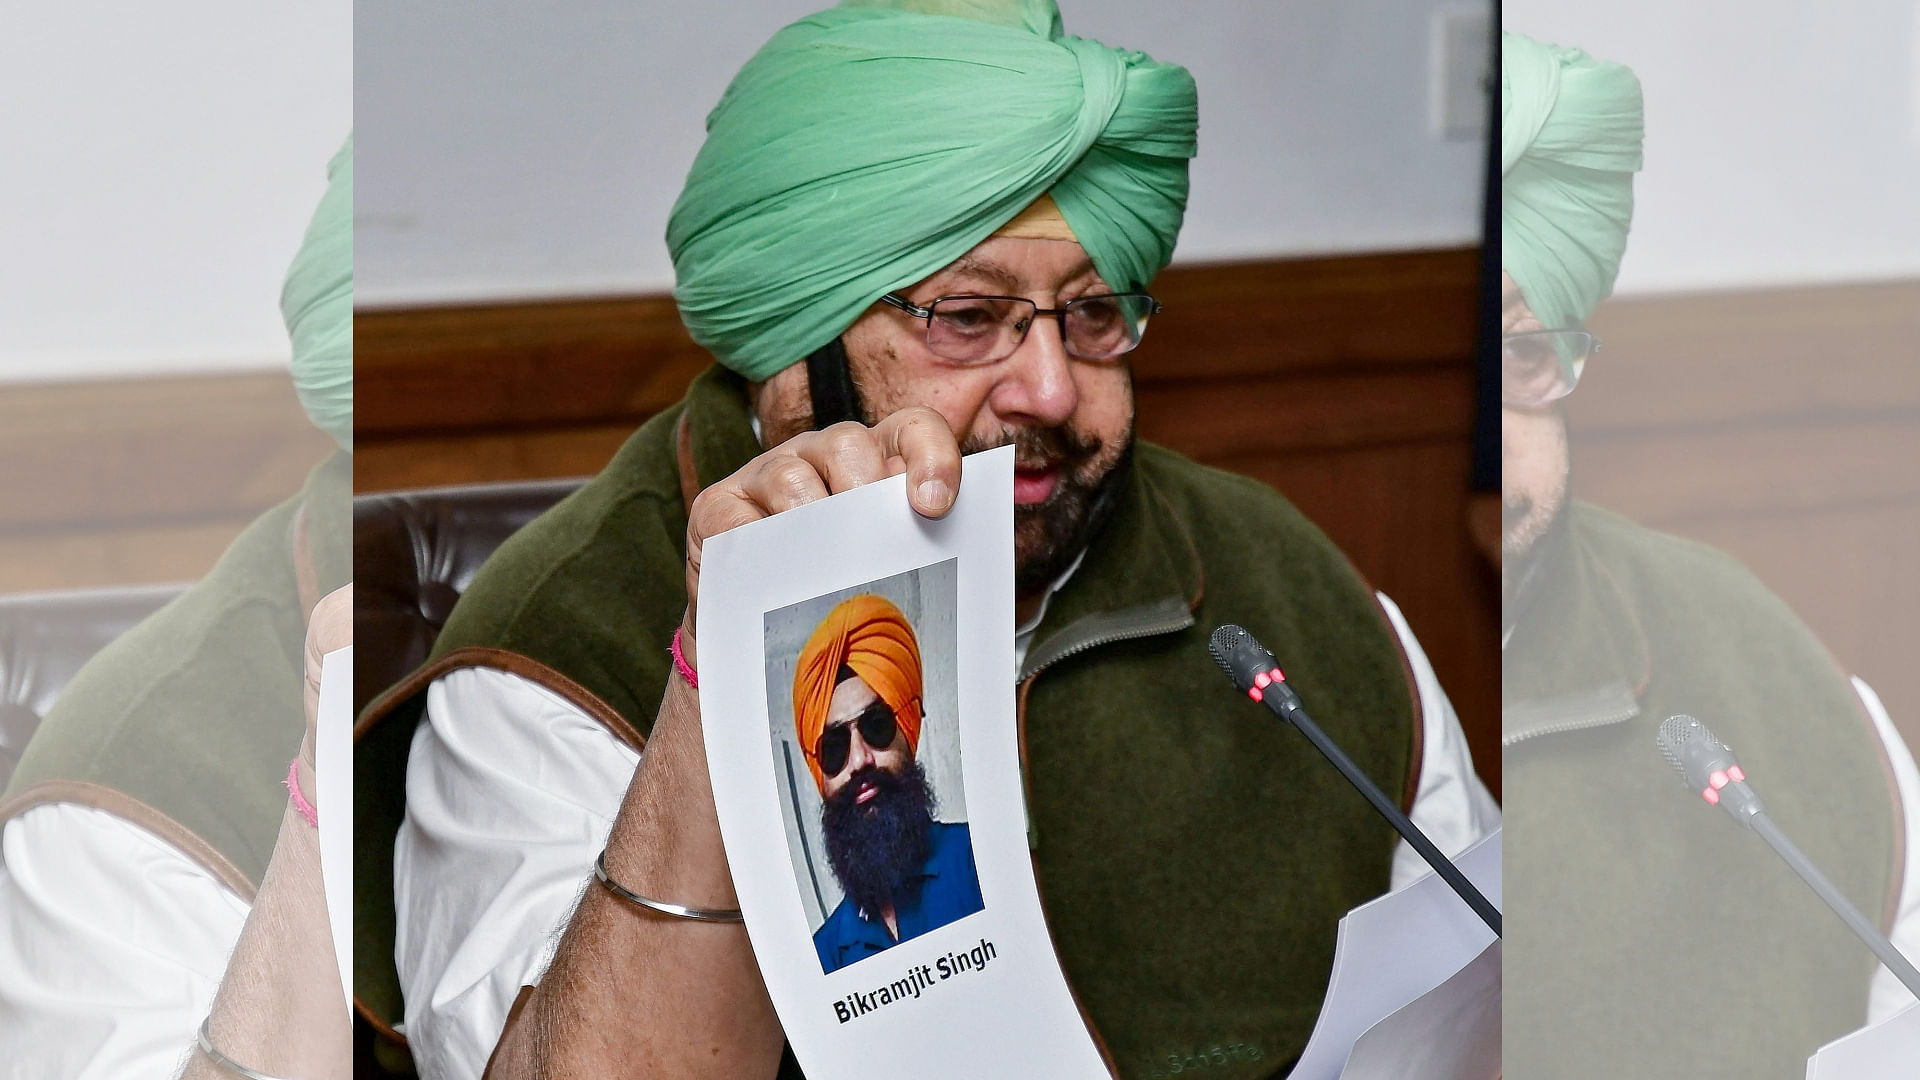 Punjab Chief Minister Capt. Amarinder Singh shows a picture of Amritsar grenade blast co-accused Bikramjit Singh to the media during a press conference in Chandigarh.